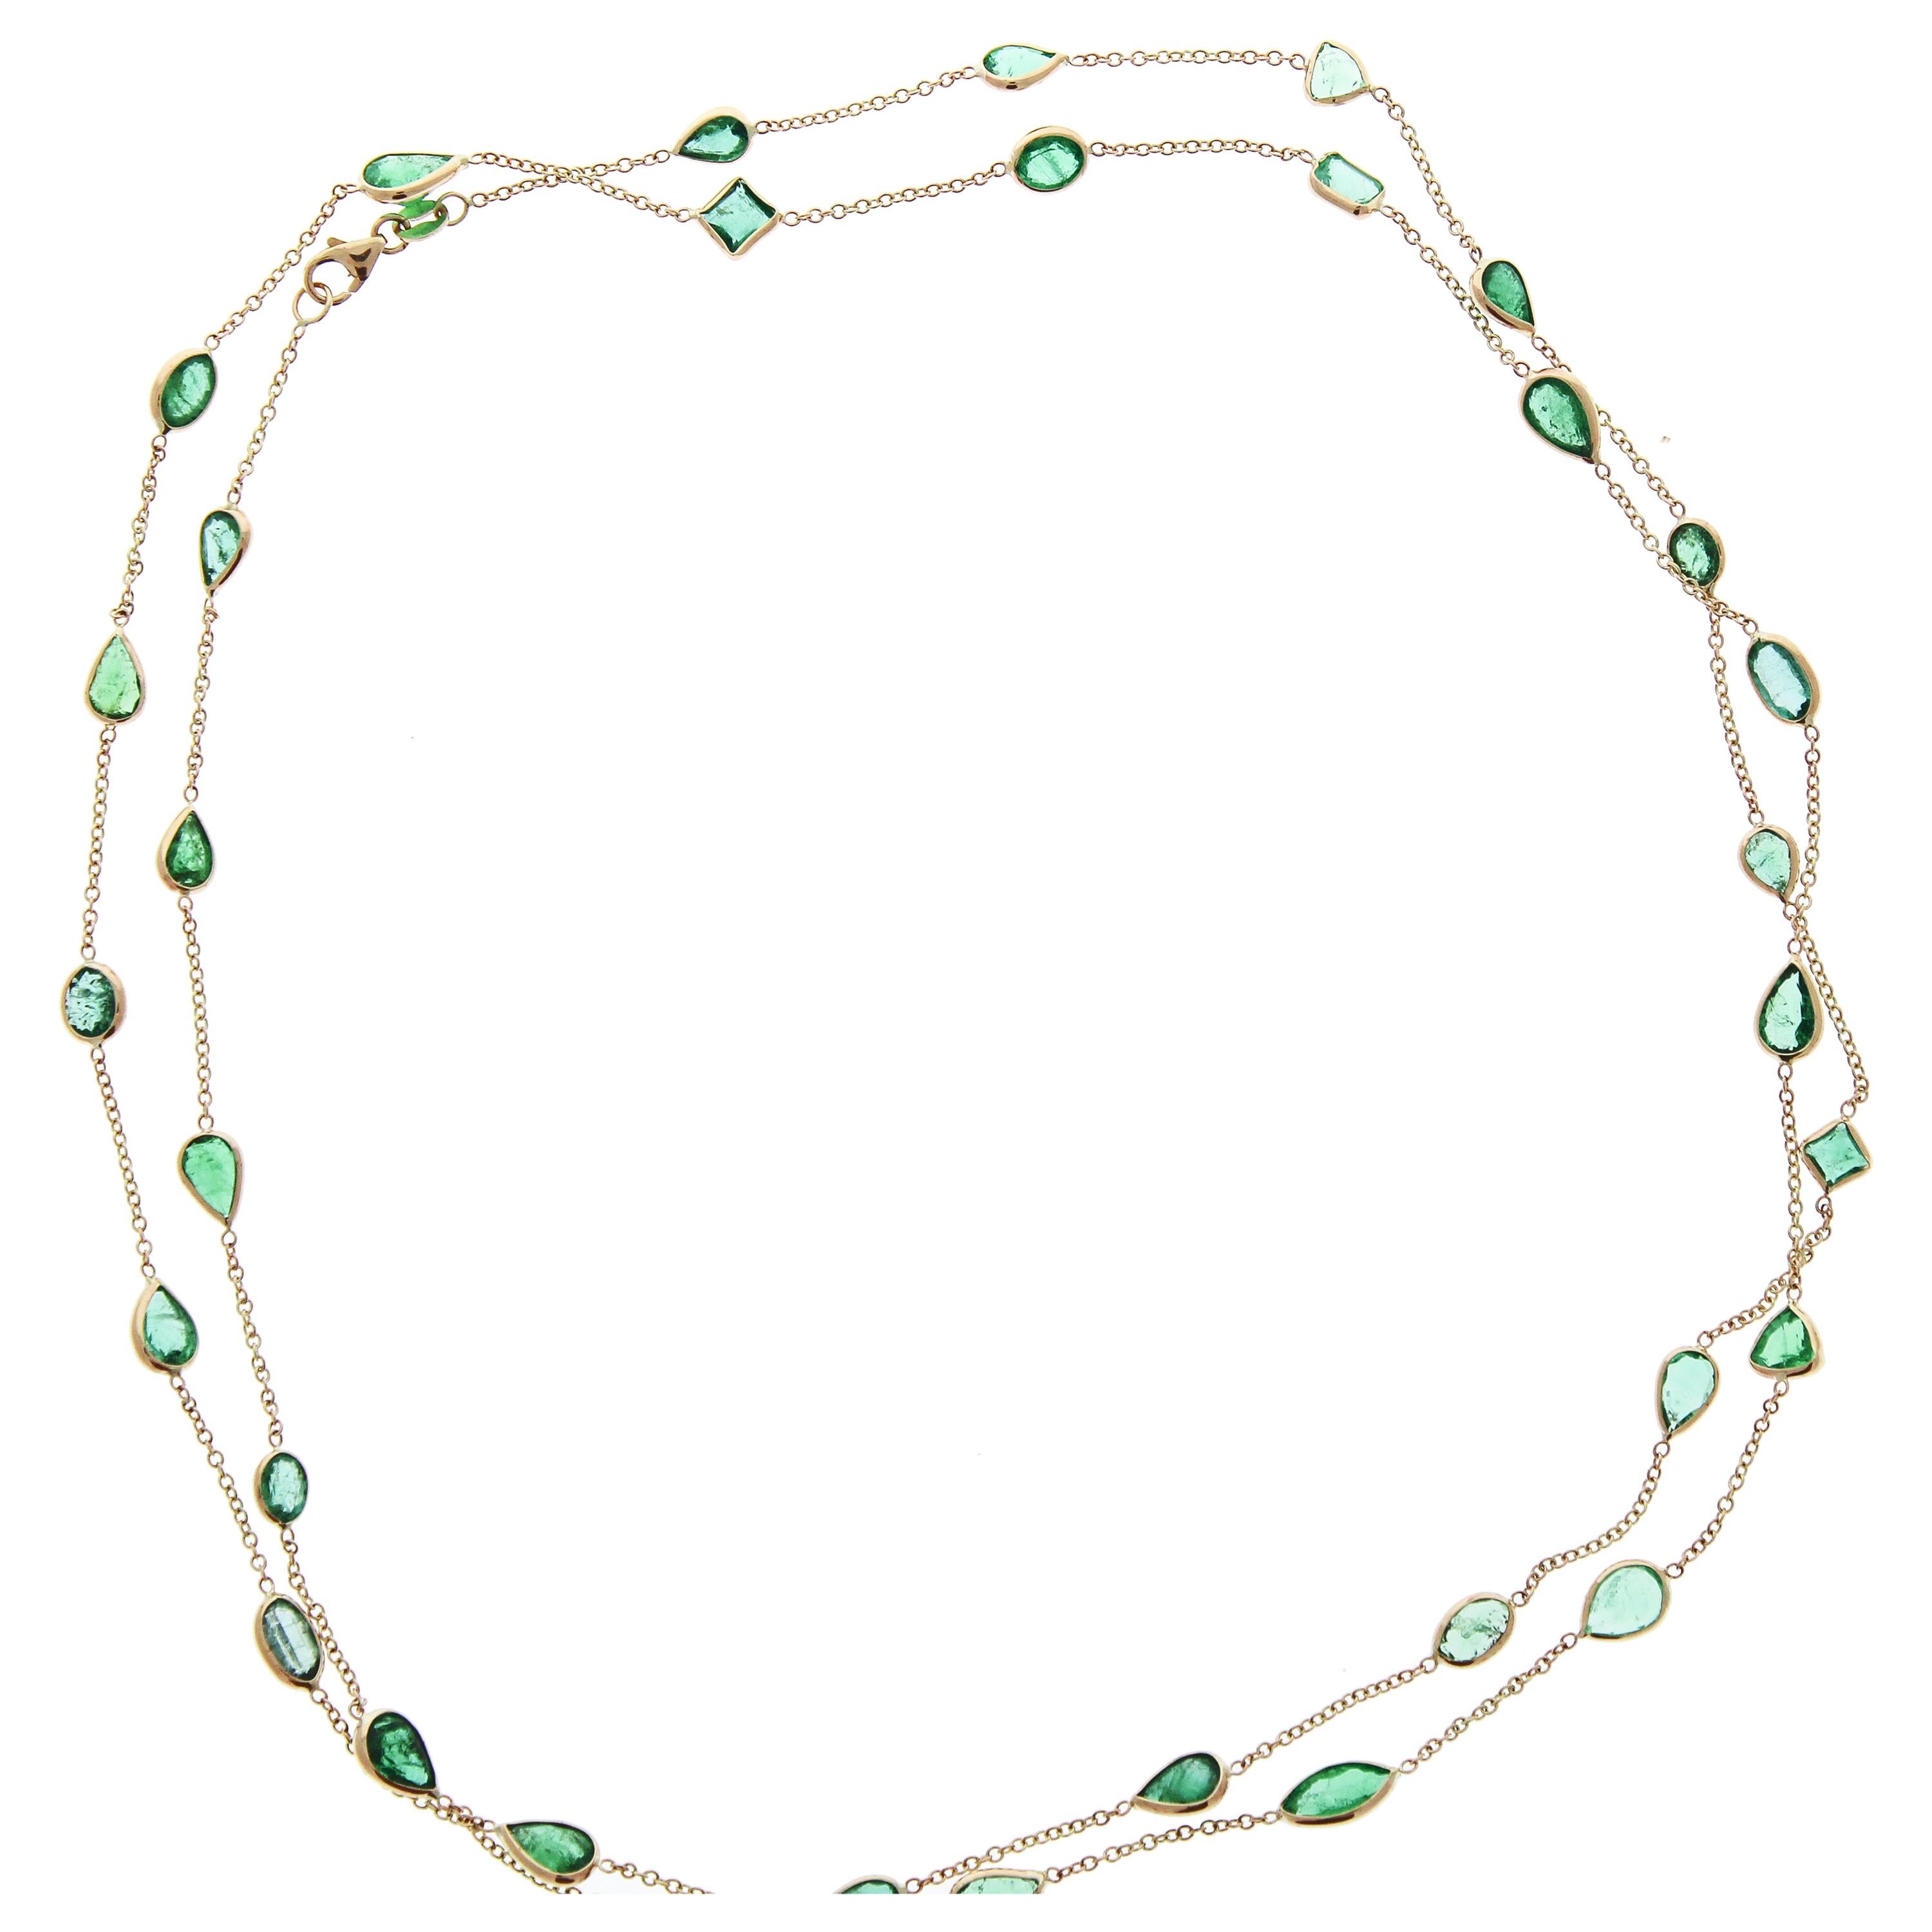 14.22 Carat Mixed Cut Emerald Necklace in 14K Yellow Gold For Sale